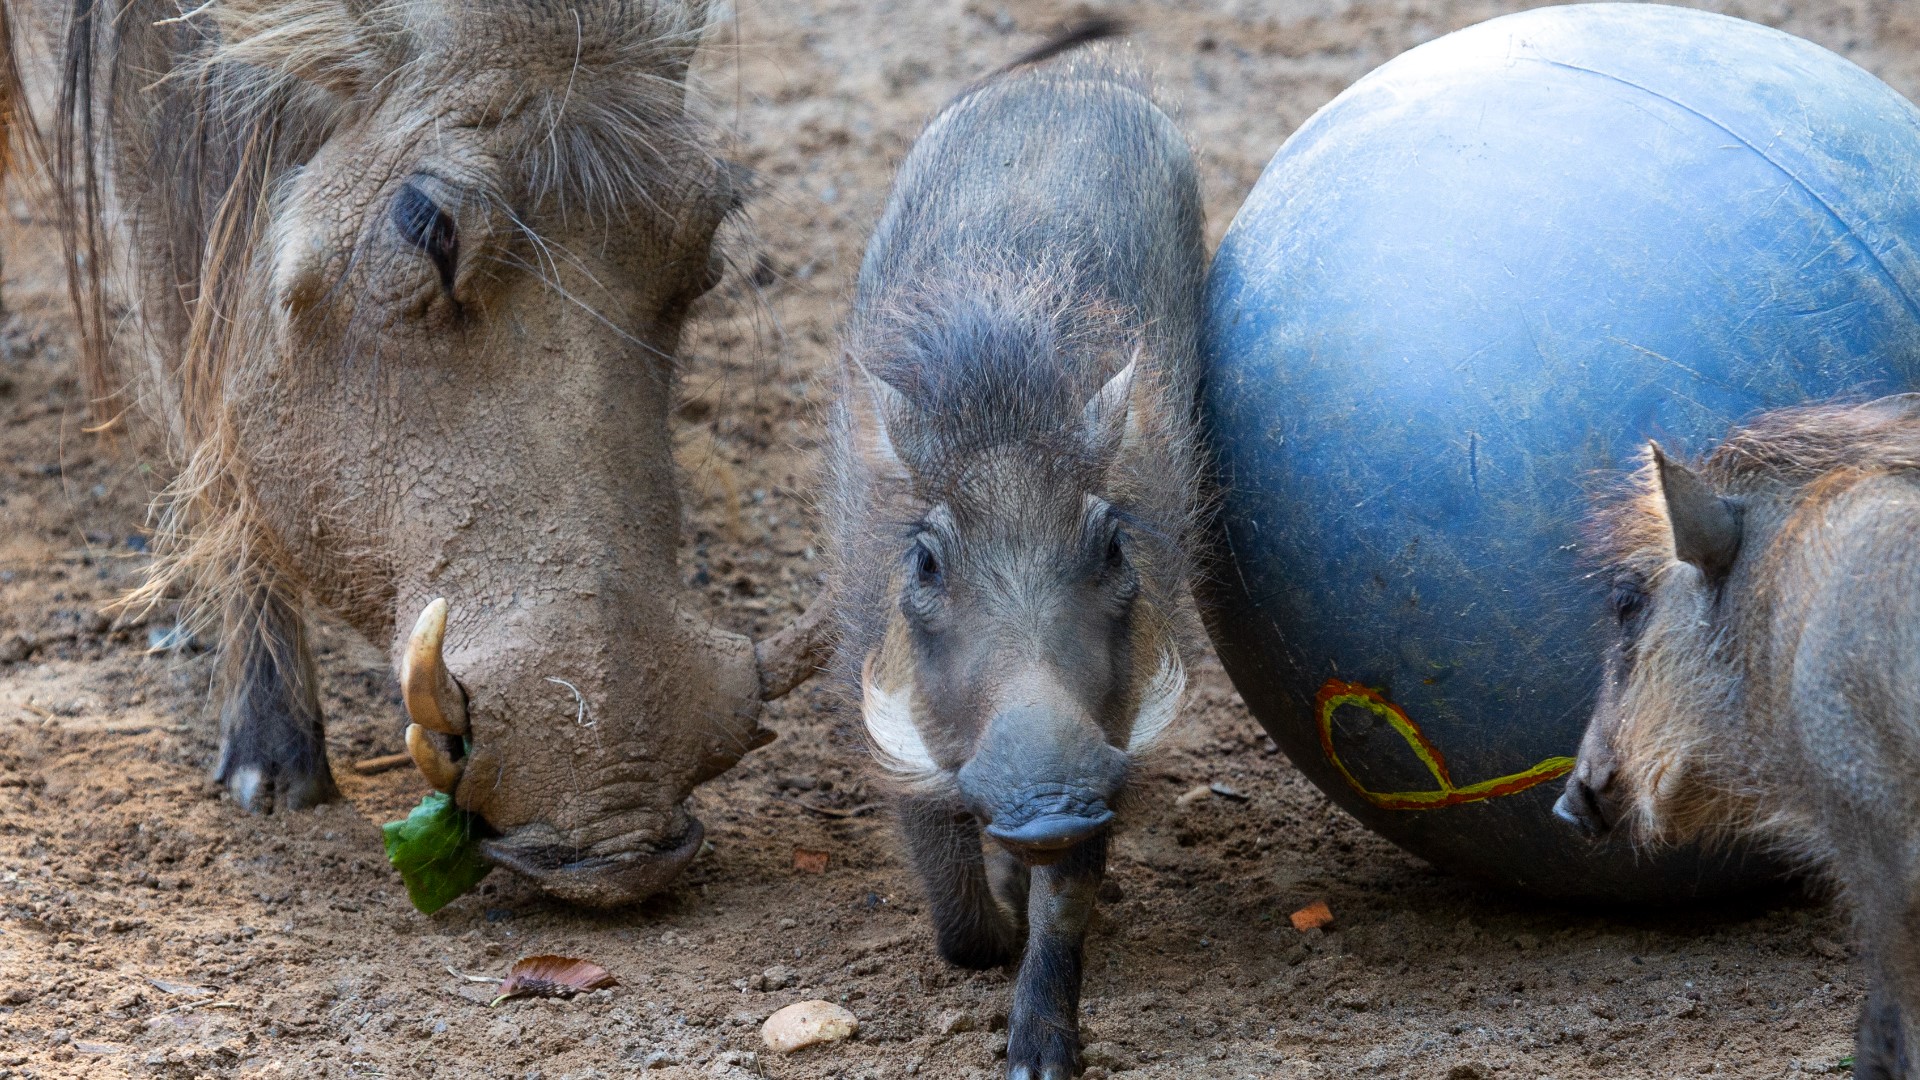 The piglets, who are the first litter for warthog pair Eleanor and Hamlet, were born on April 13.